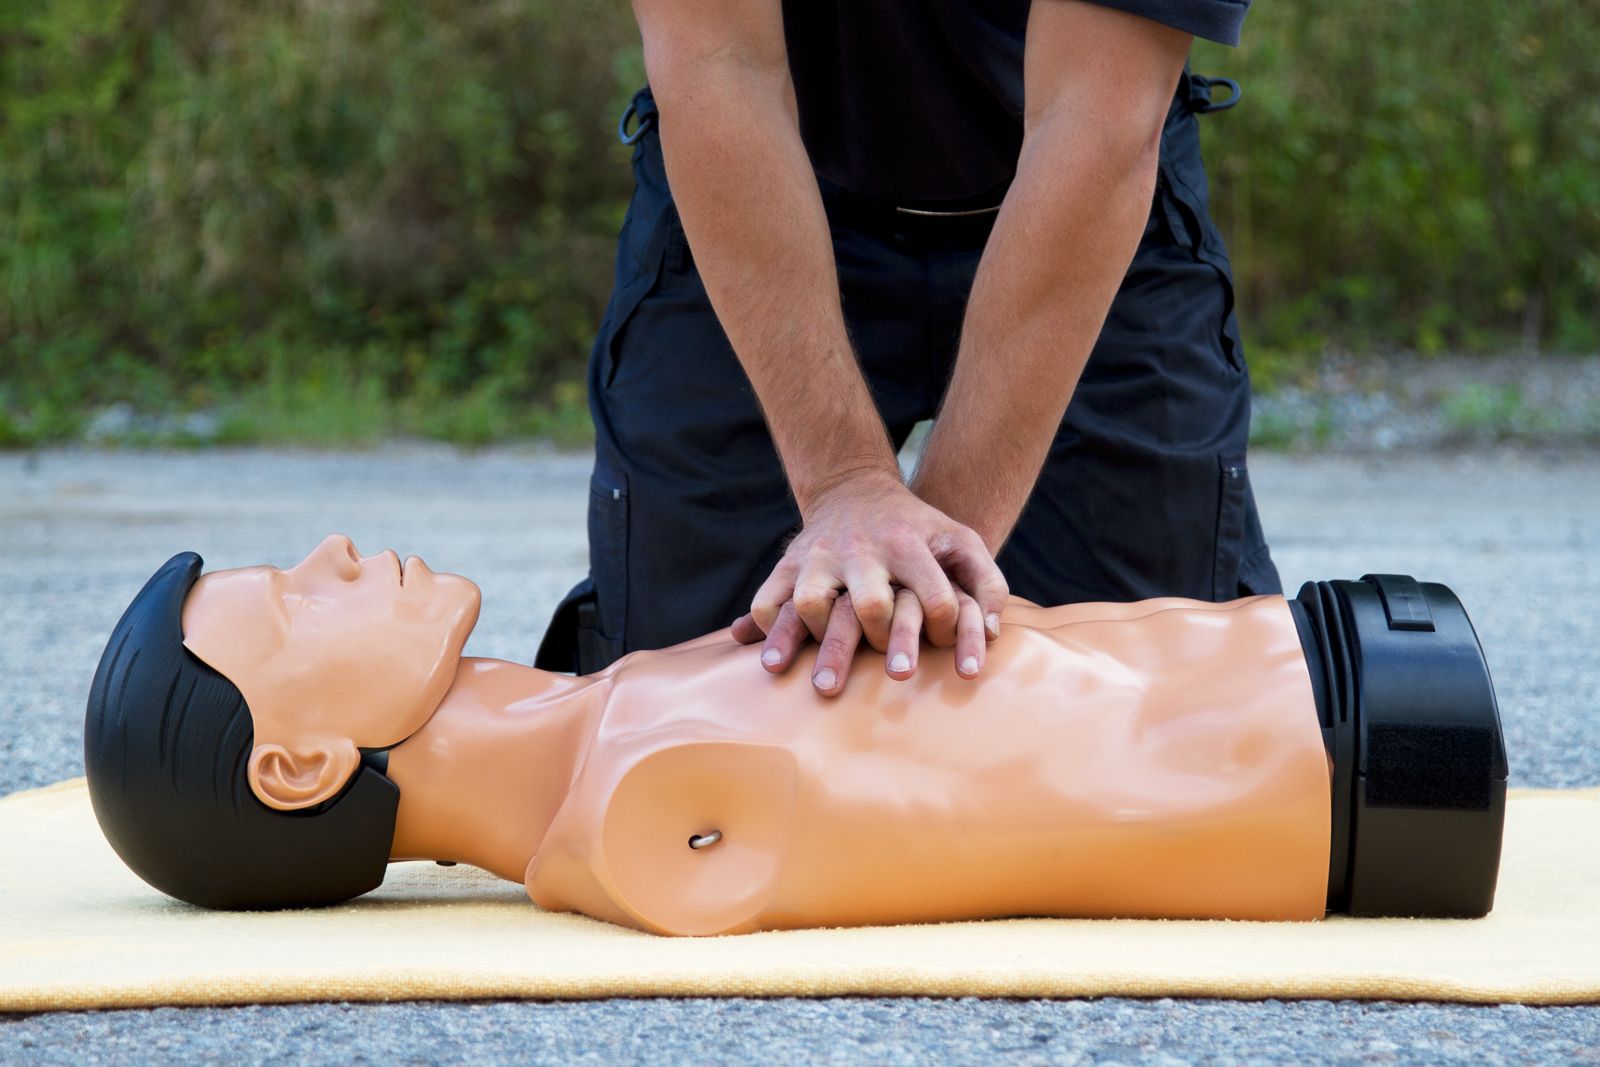 someone performing cpr on a dummy shutterstock types of cpr